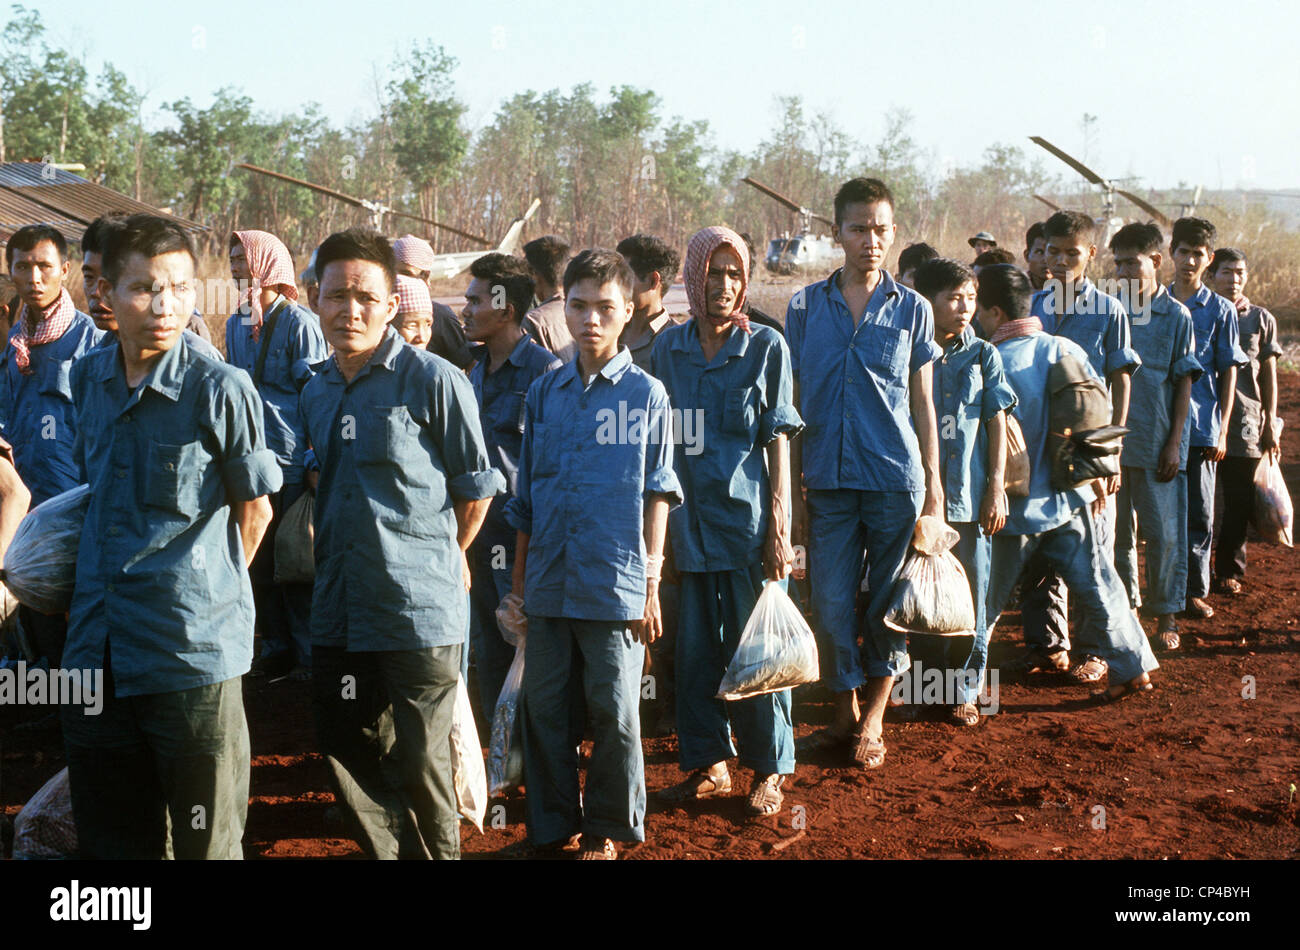 South Vietnamese POWS released. Members of the Army of Republic of Vietnam held prisoner by North Vietnam were released in Loc Stock Photo